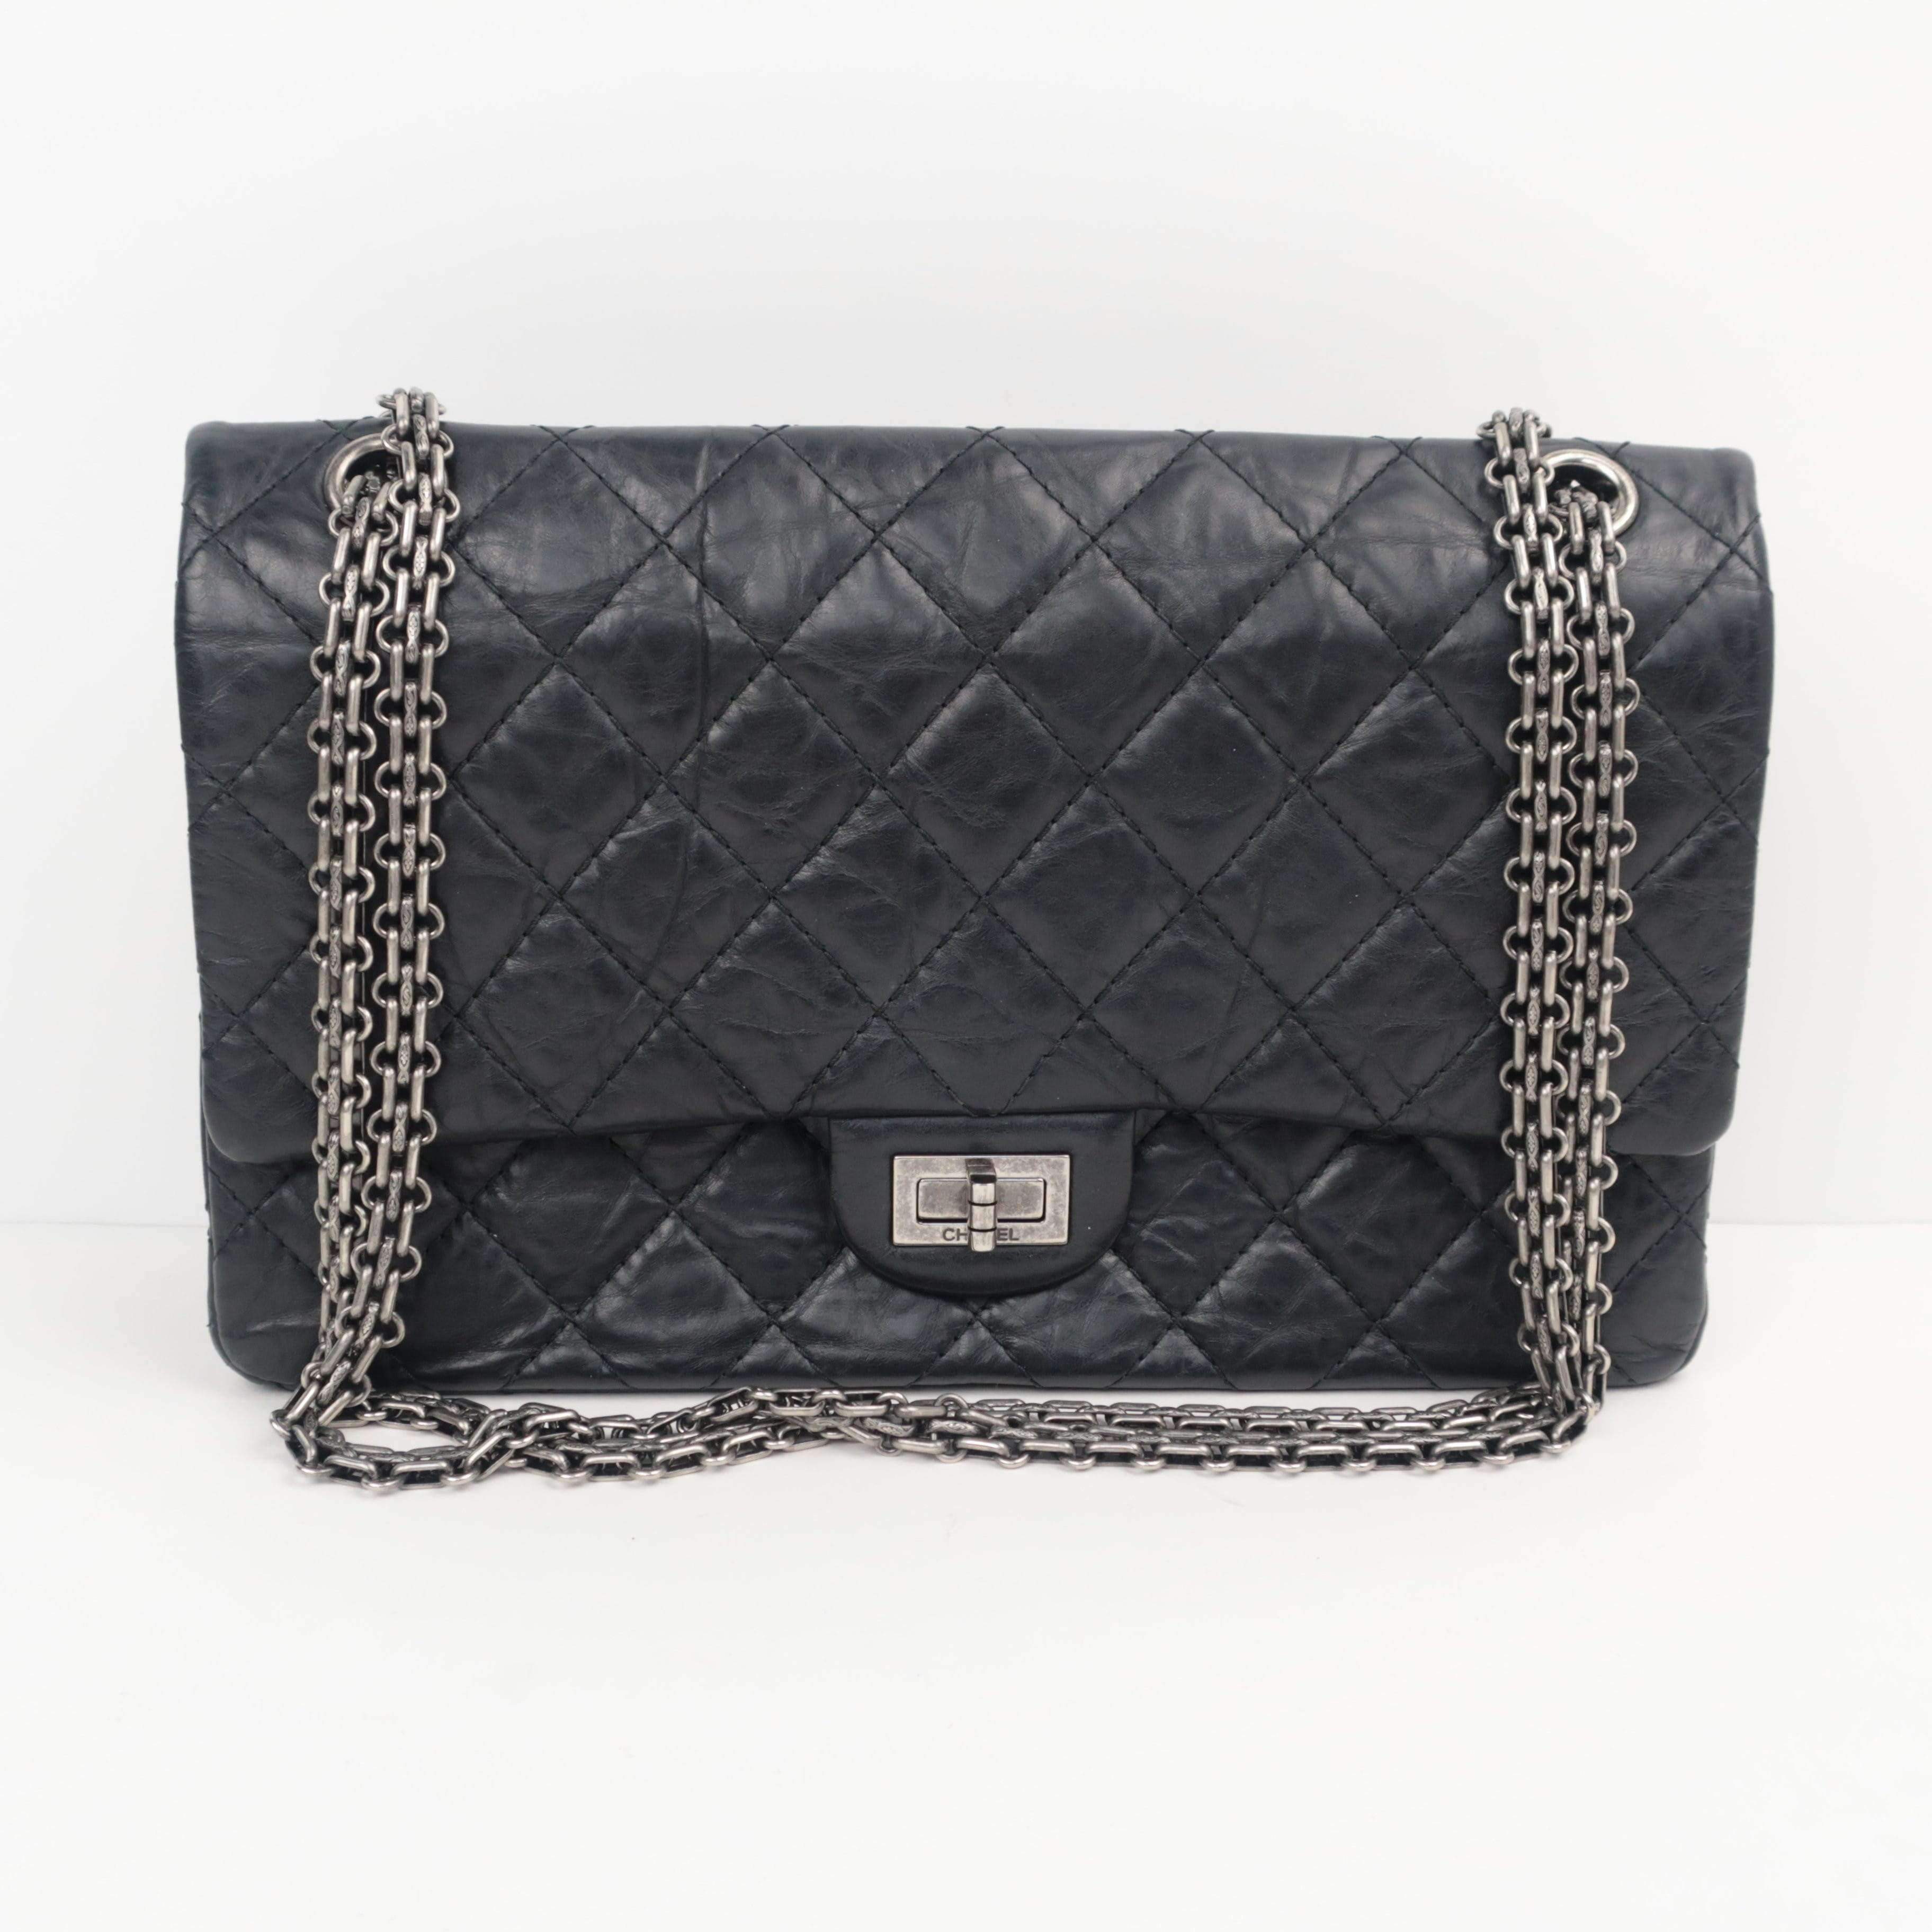 Will Chanel Fix My Bag? Everything You Need to Know About Chanel Repair chanel lambskin